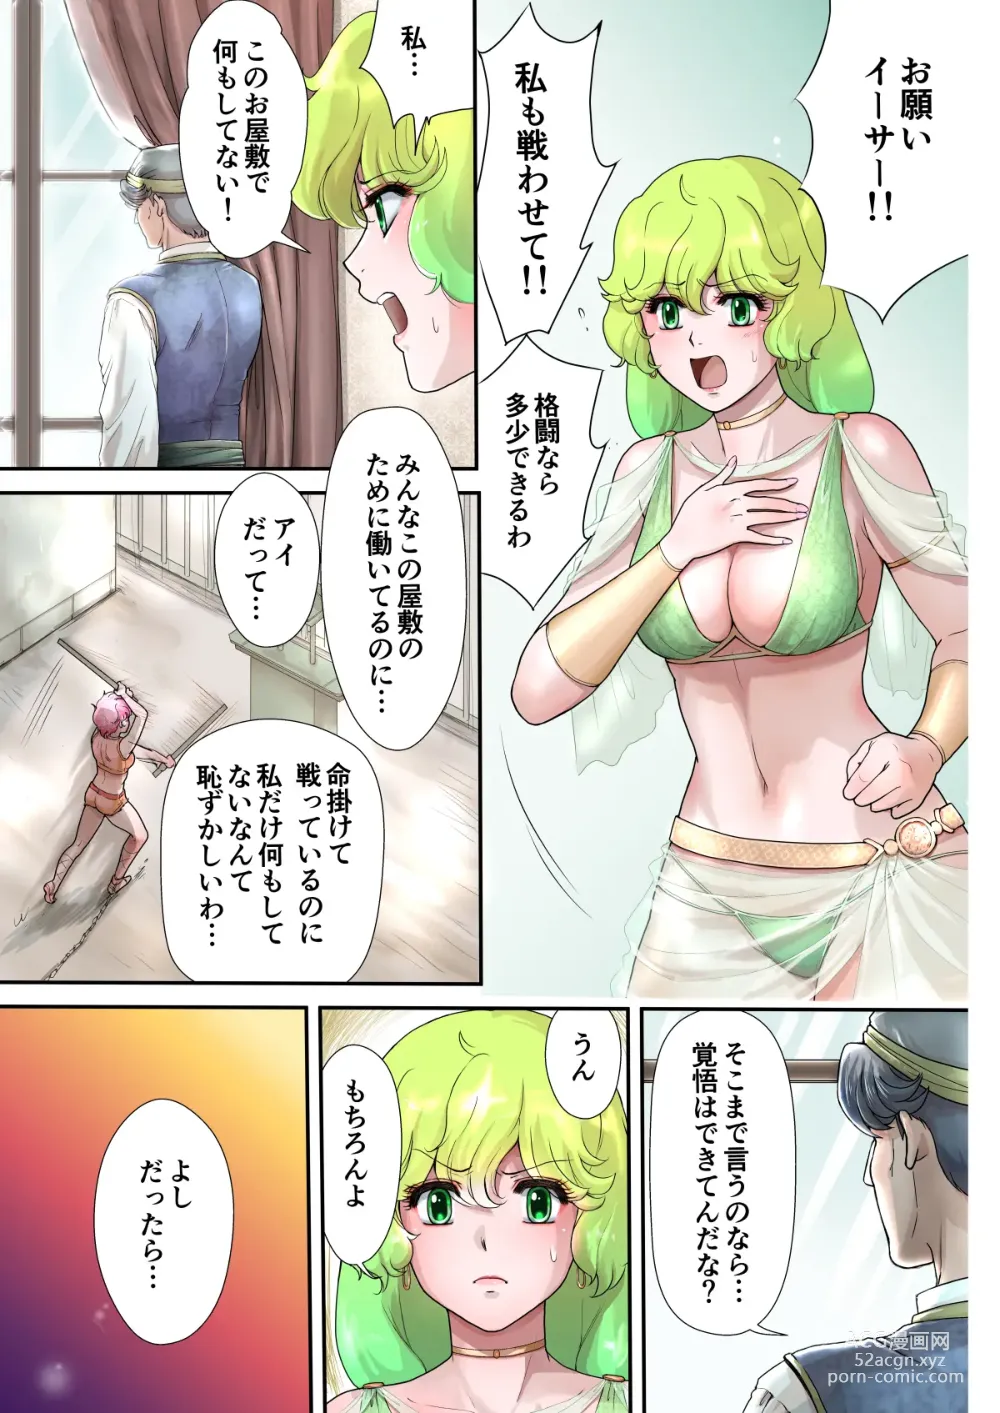 Page 2 of doujinshi Cat Fighter  Mimia